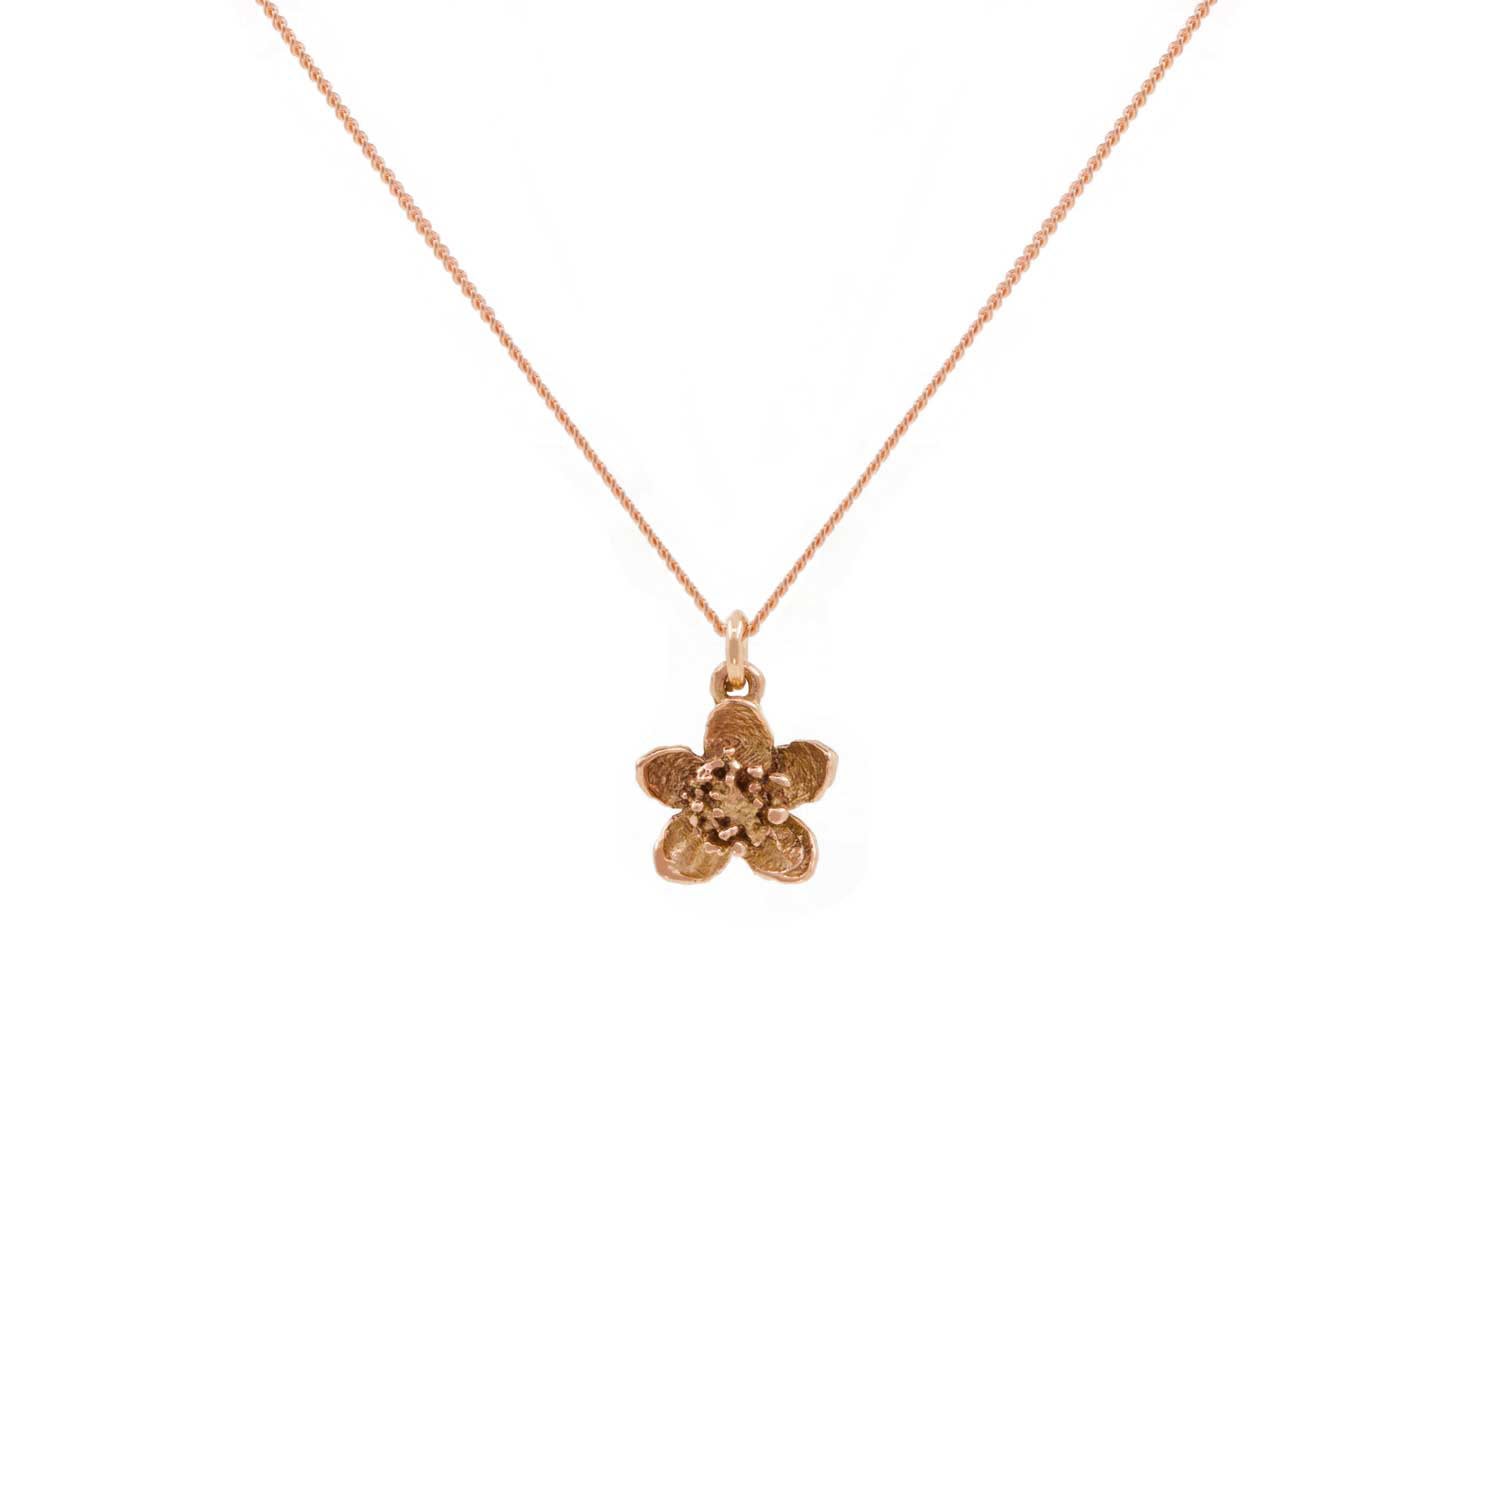 Women’s Neutrals / Rose Gold / Pink Cherry Blossom Necklace - Rose Gold Lee Renee